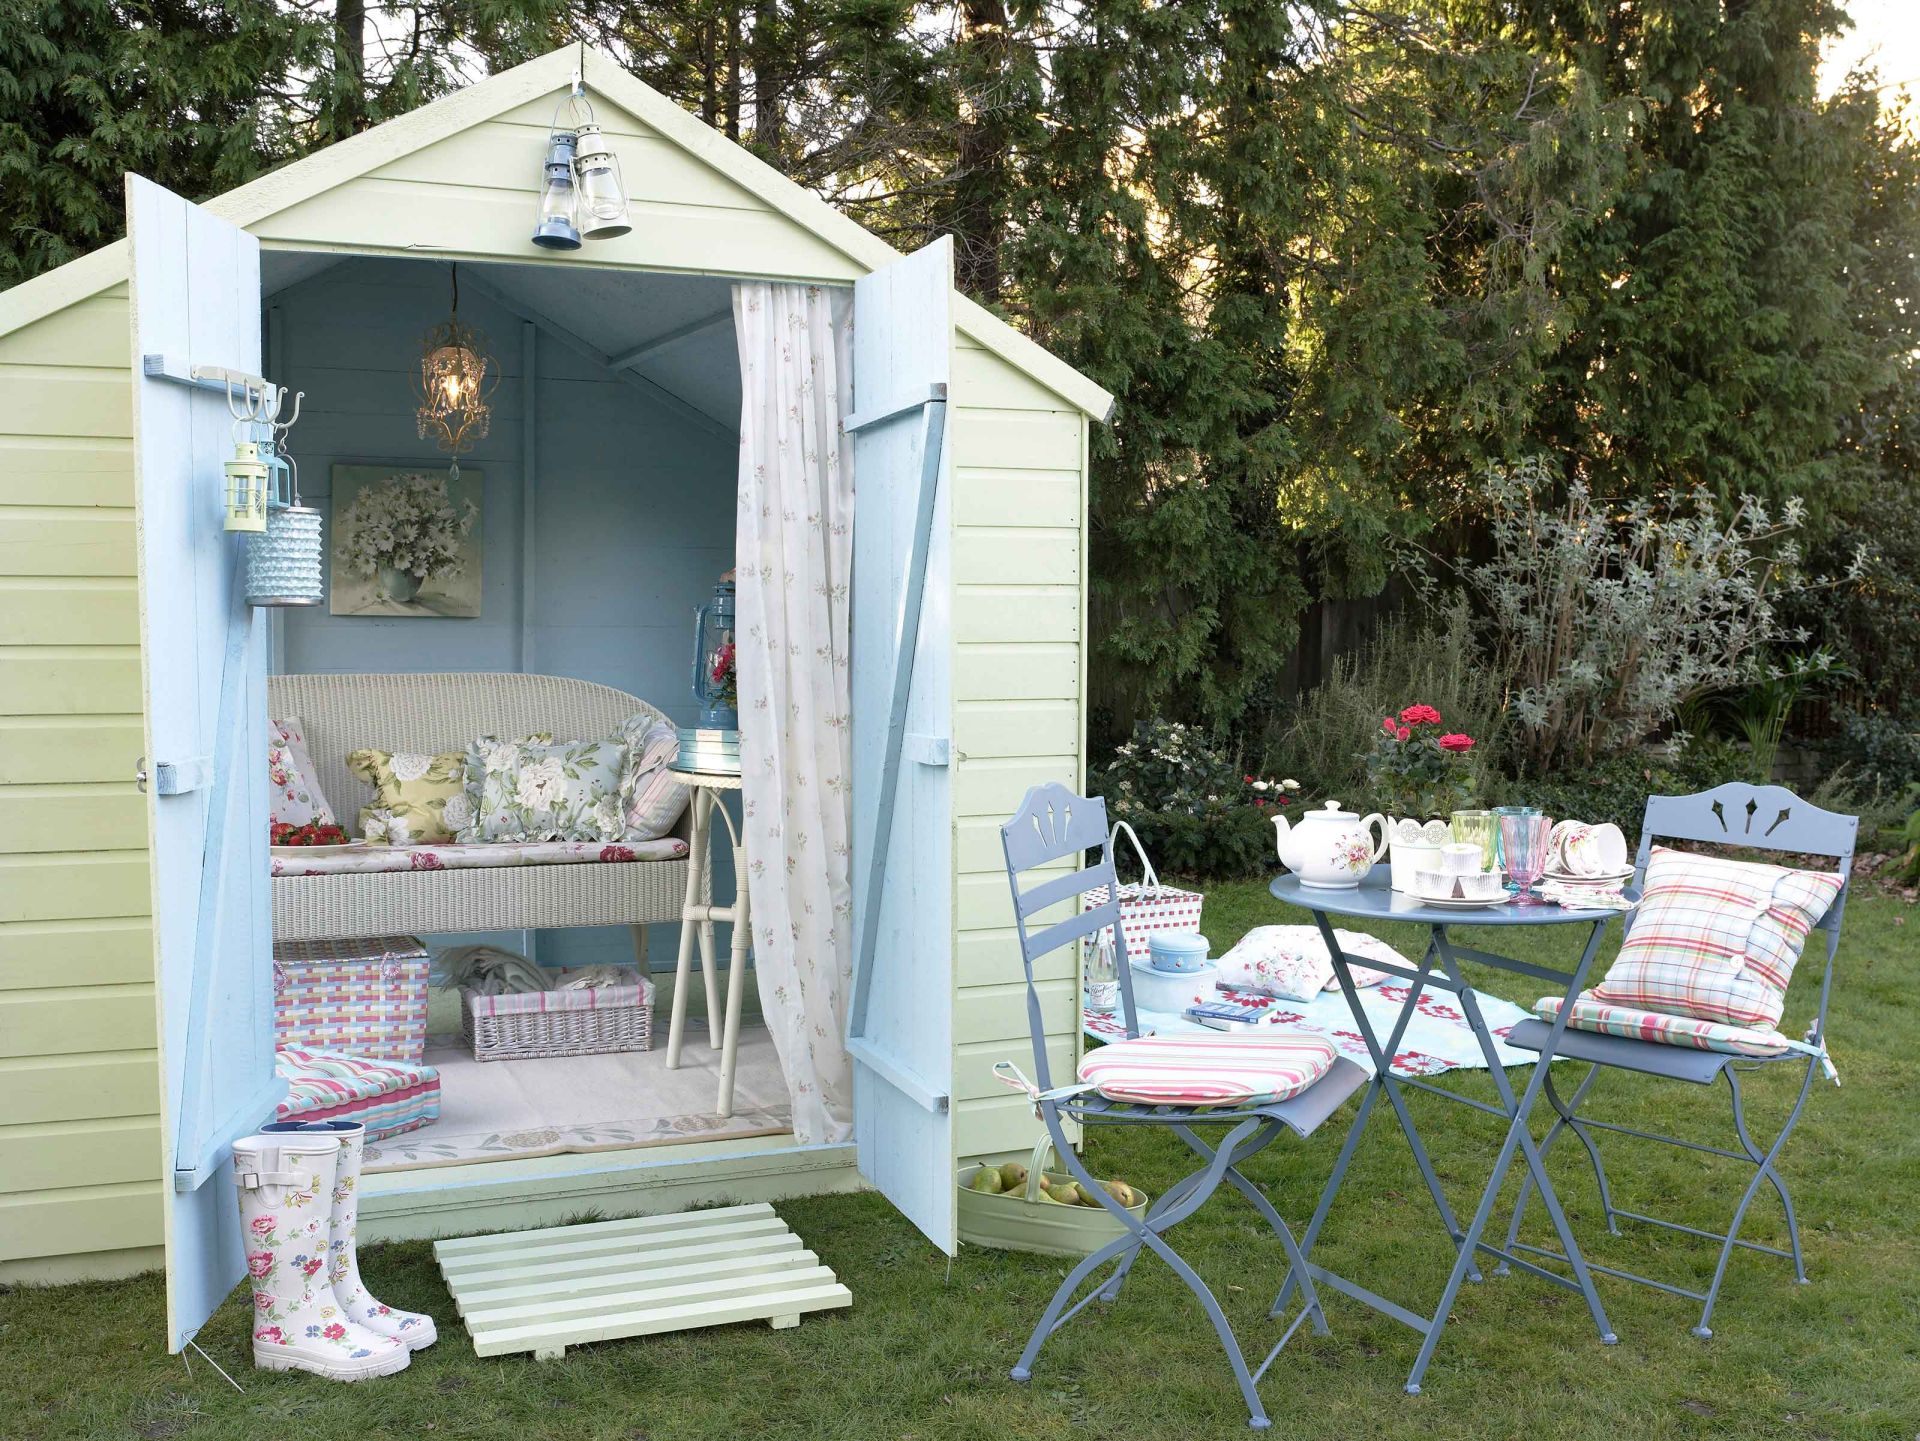 She shed ideas: 30 ways to create a gorgeous garden hideaway